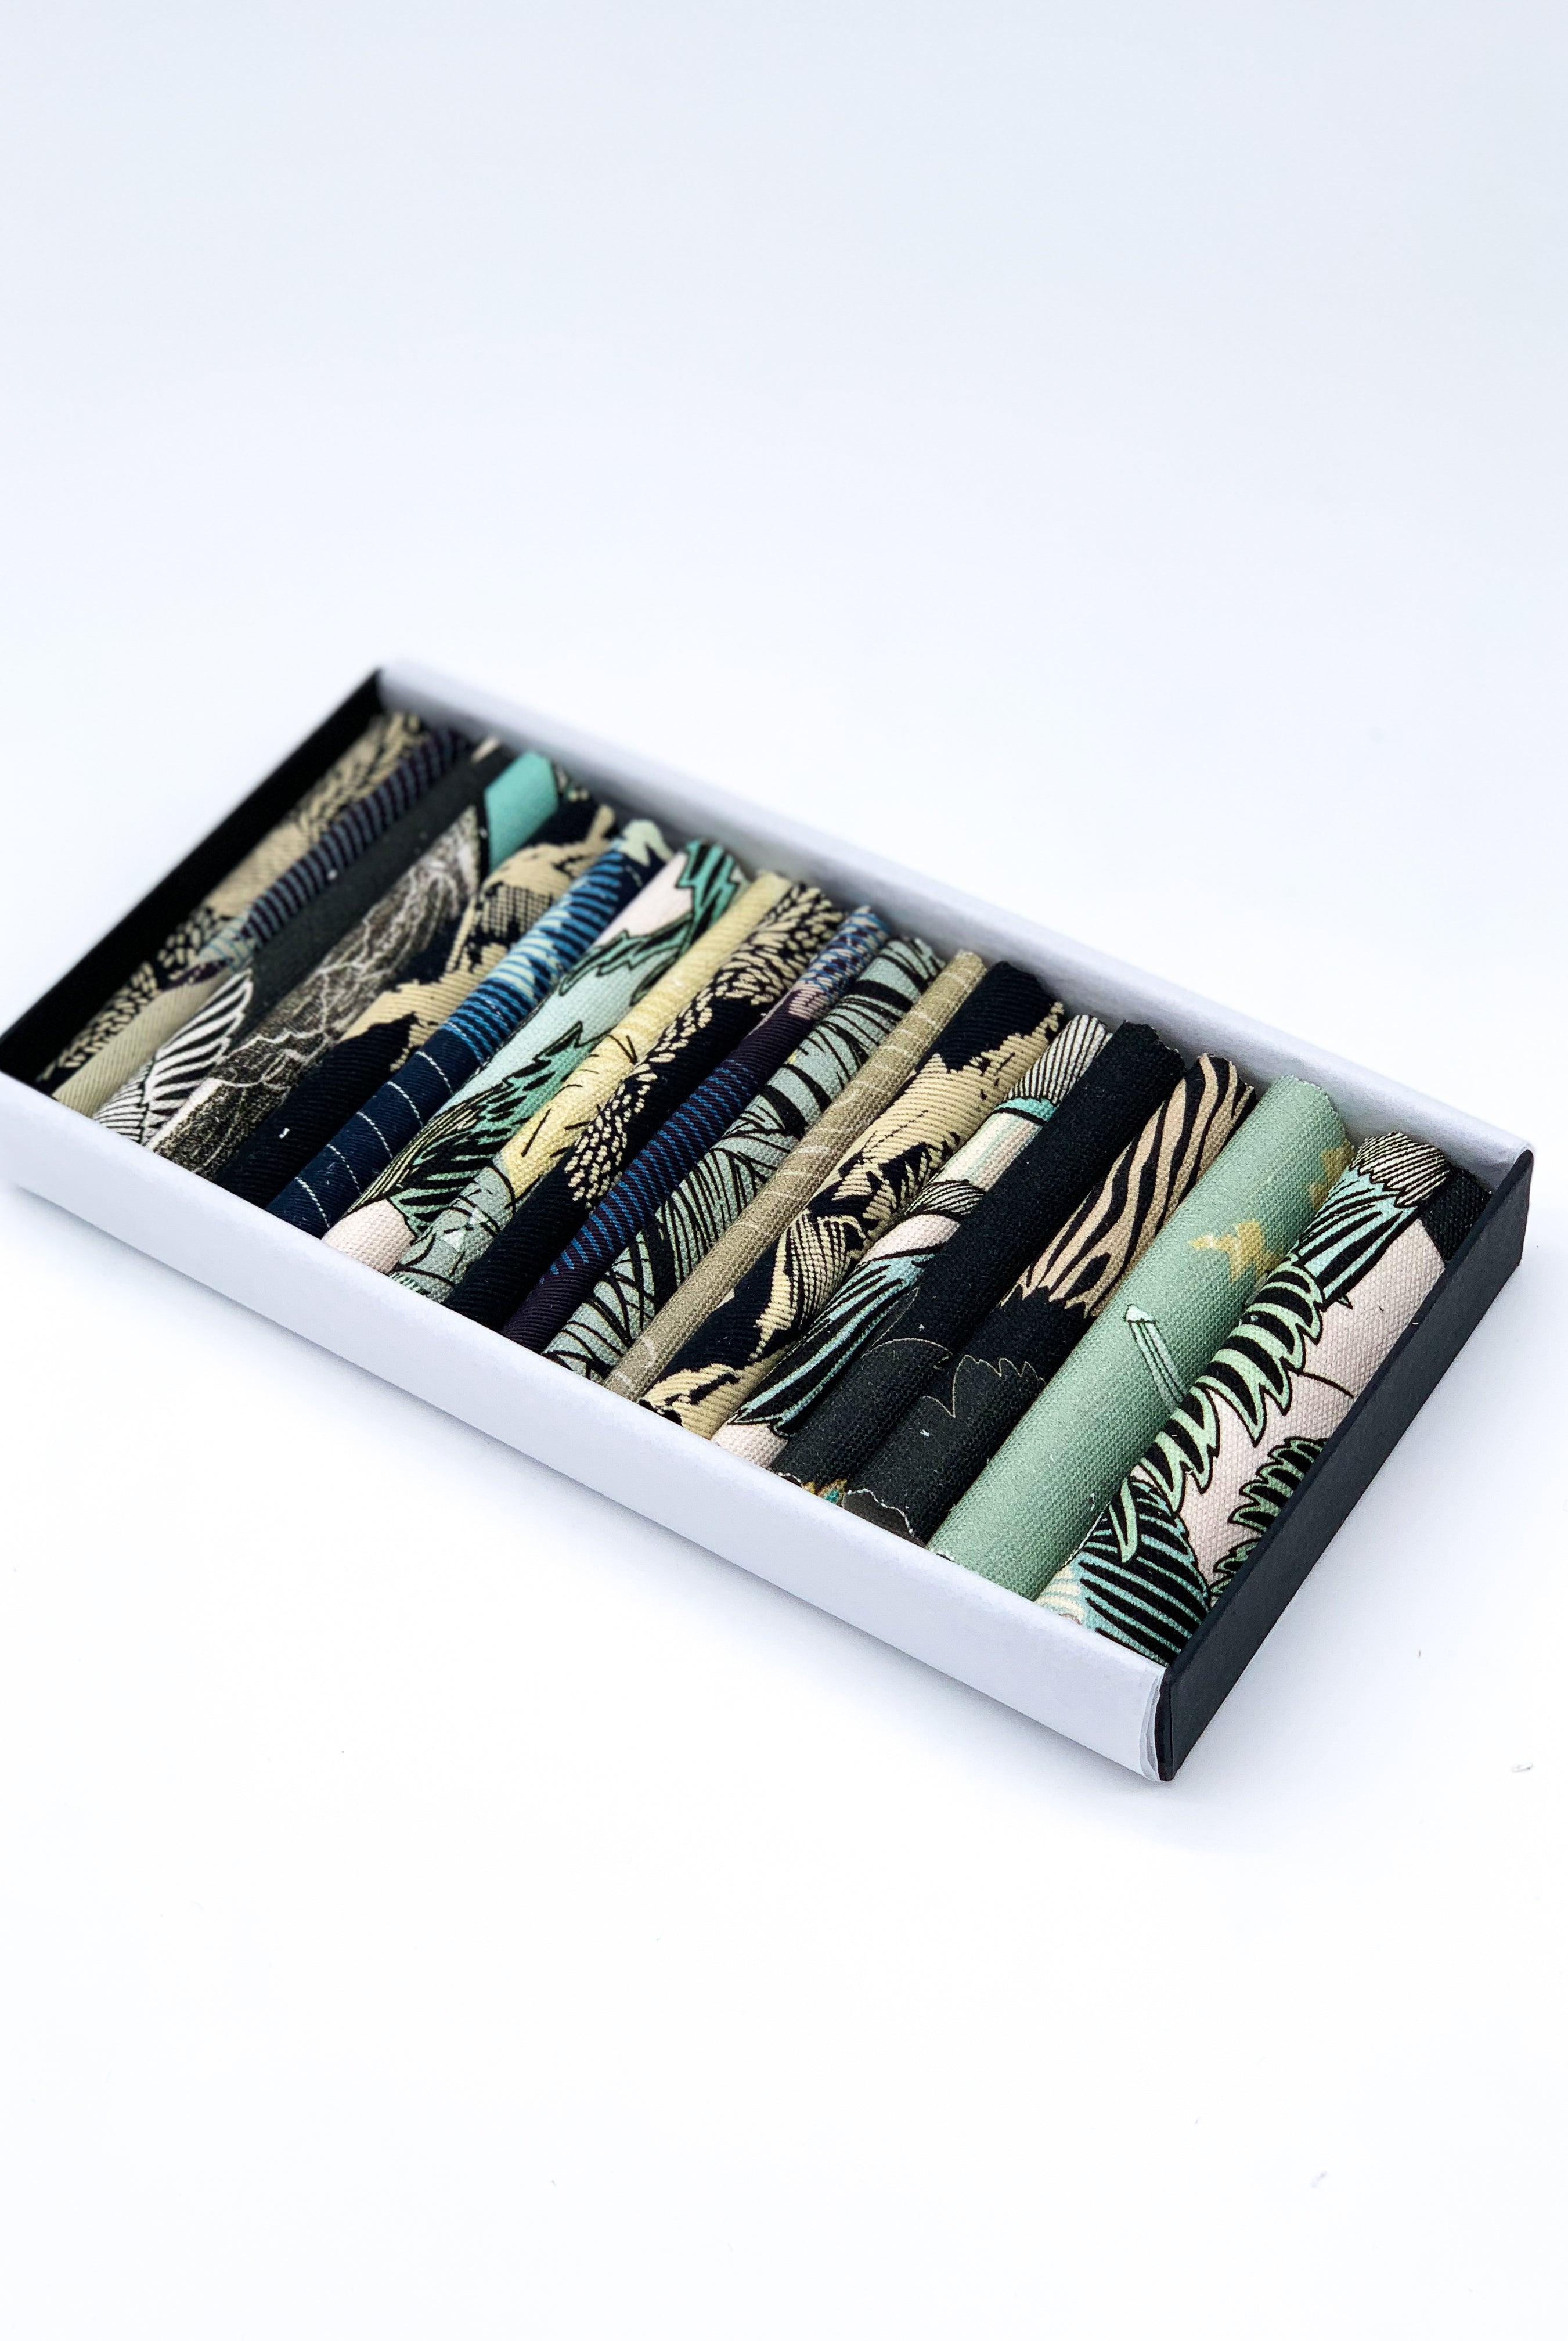 An off- cut fabric box containing dark tone pieces 